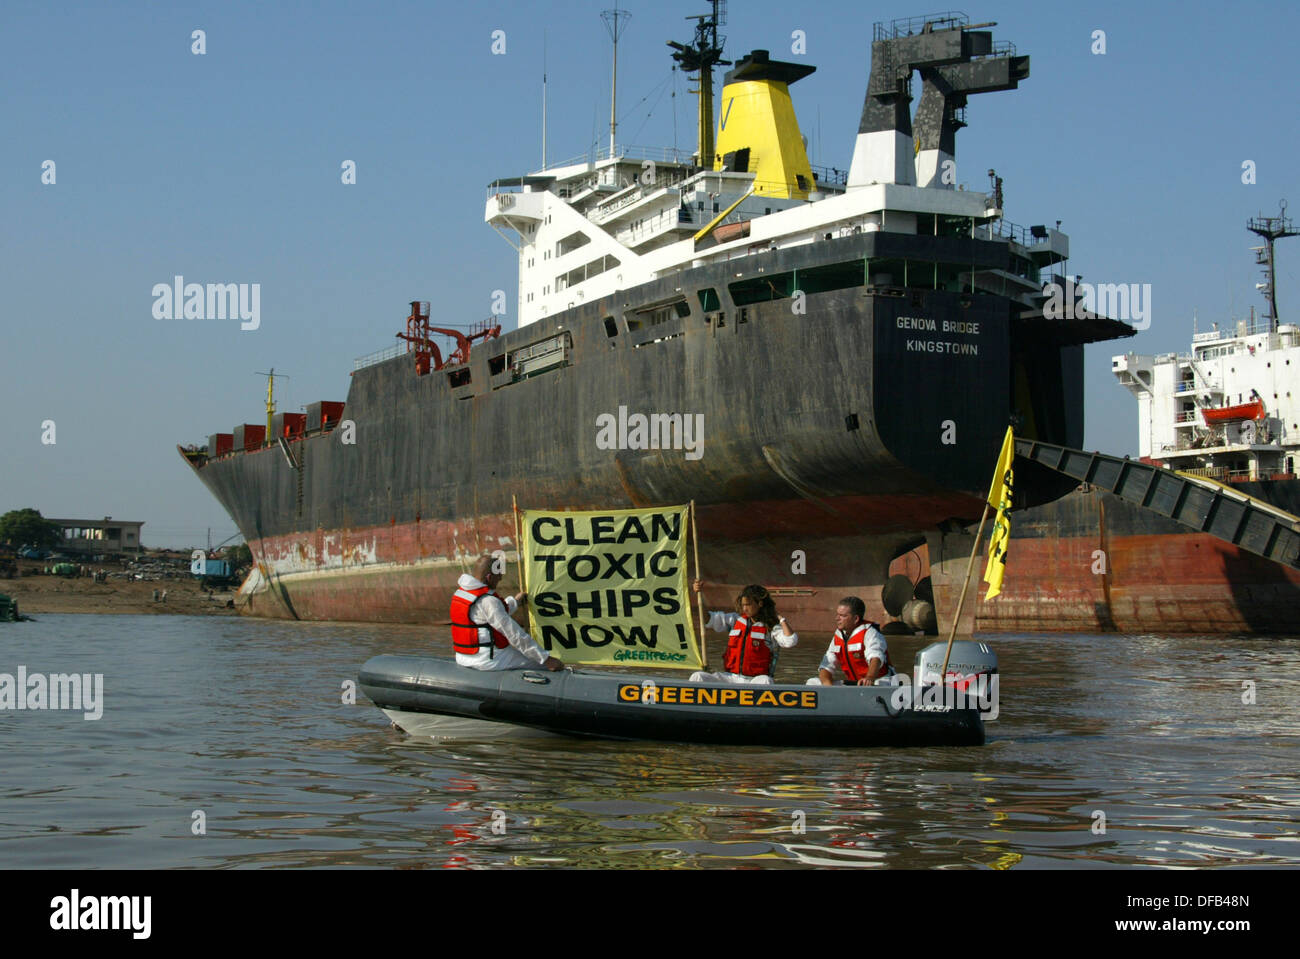 Greenpeace activists protest in front of two illegal ships from United Kingdom which are thought to have toxic substances onboar Stock Photo